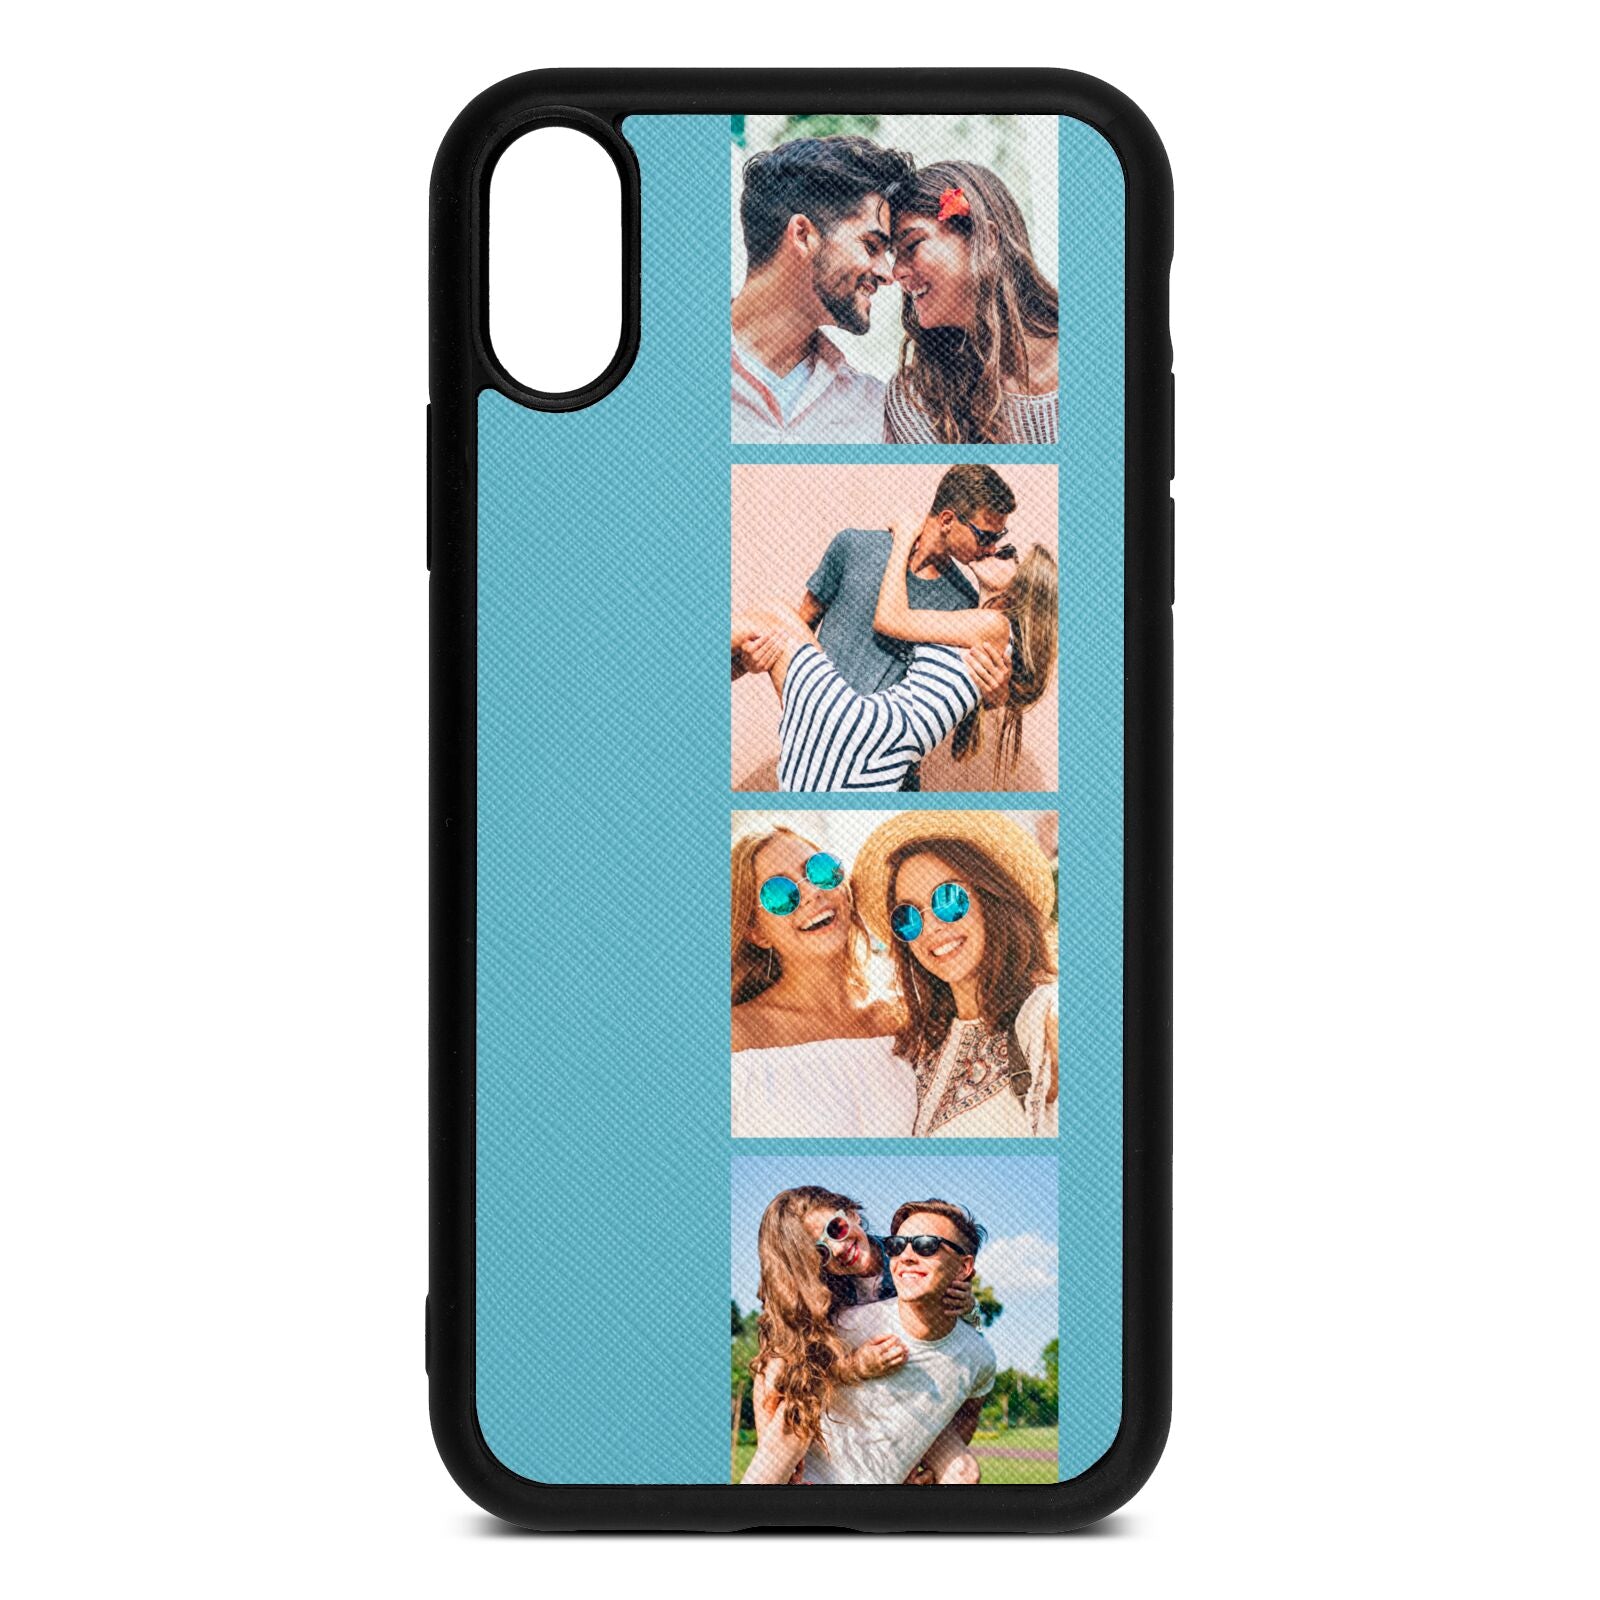 Photo Strip Montage Upload Sky Saffiano Leather iPhone Xr Case